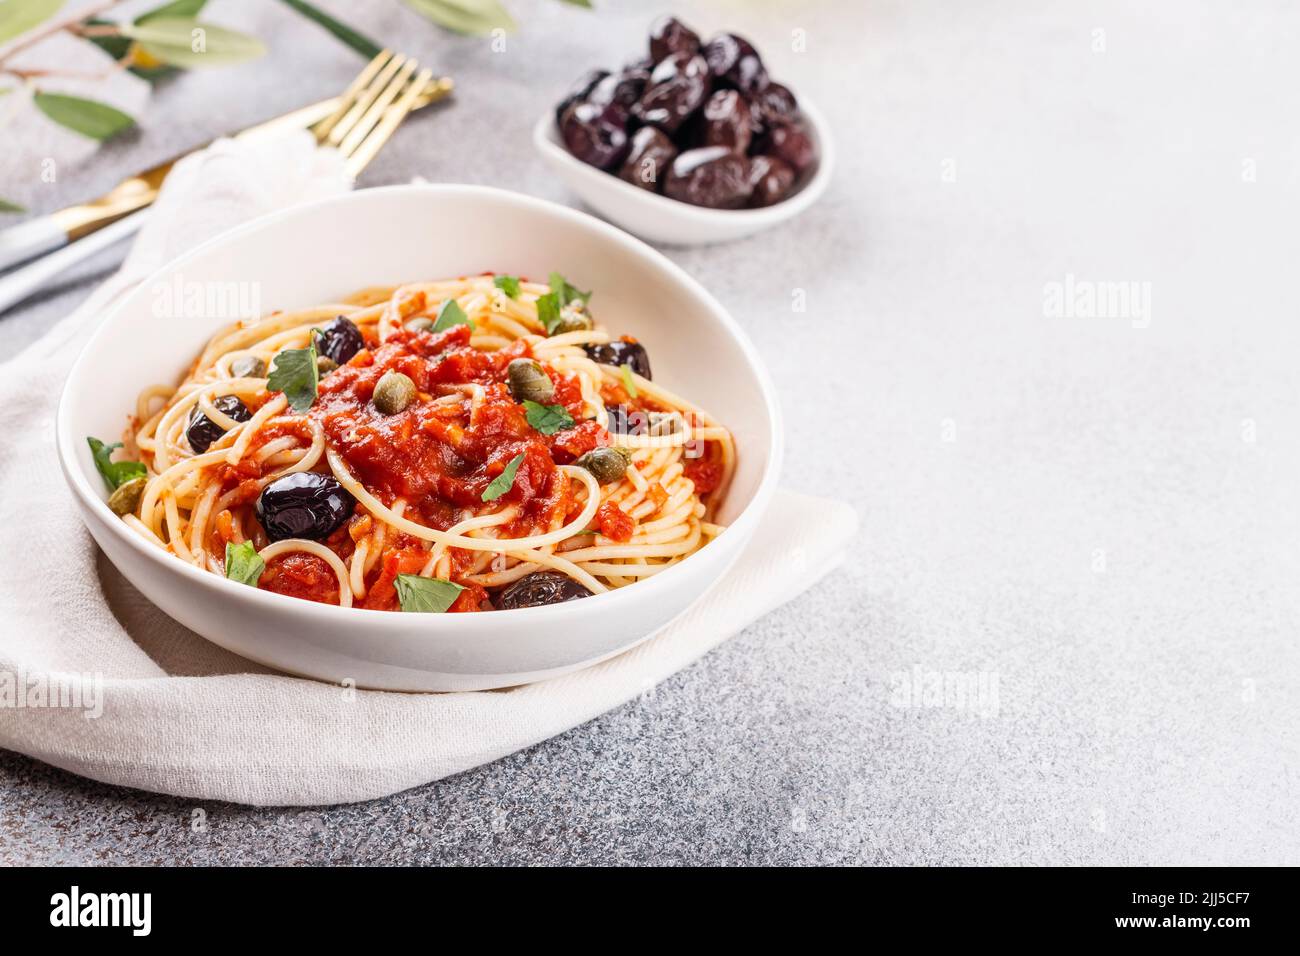 Spaghetti alla puttanesca . Italian pasta with tomatoes, olives, capers, anchovies and parsley. Italian food. Copy space Stock Photo